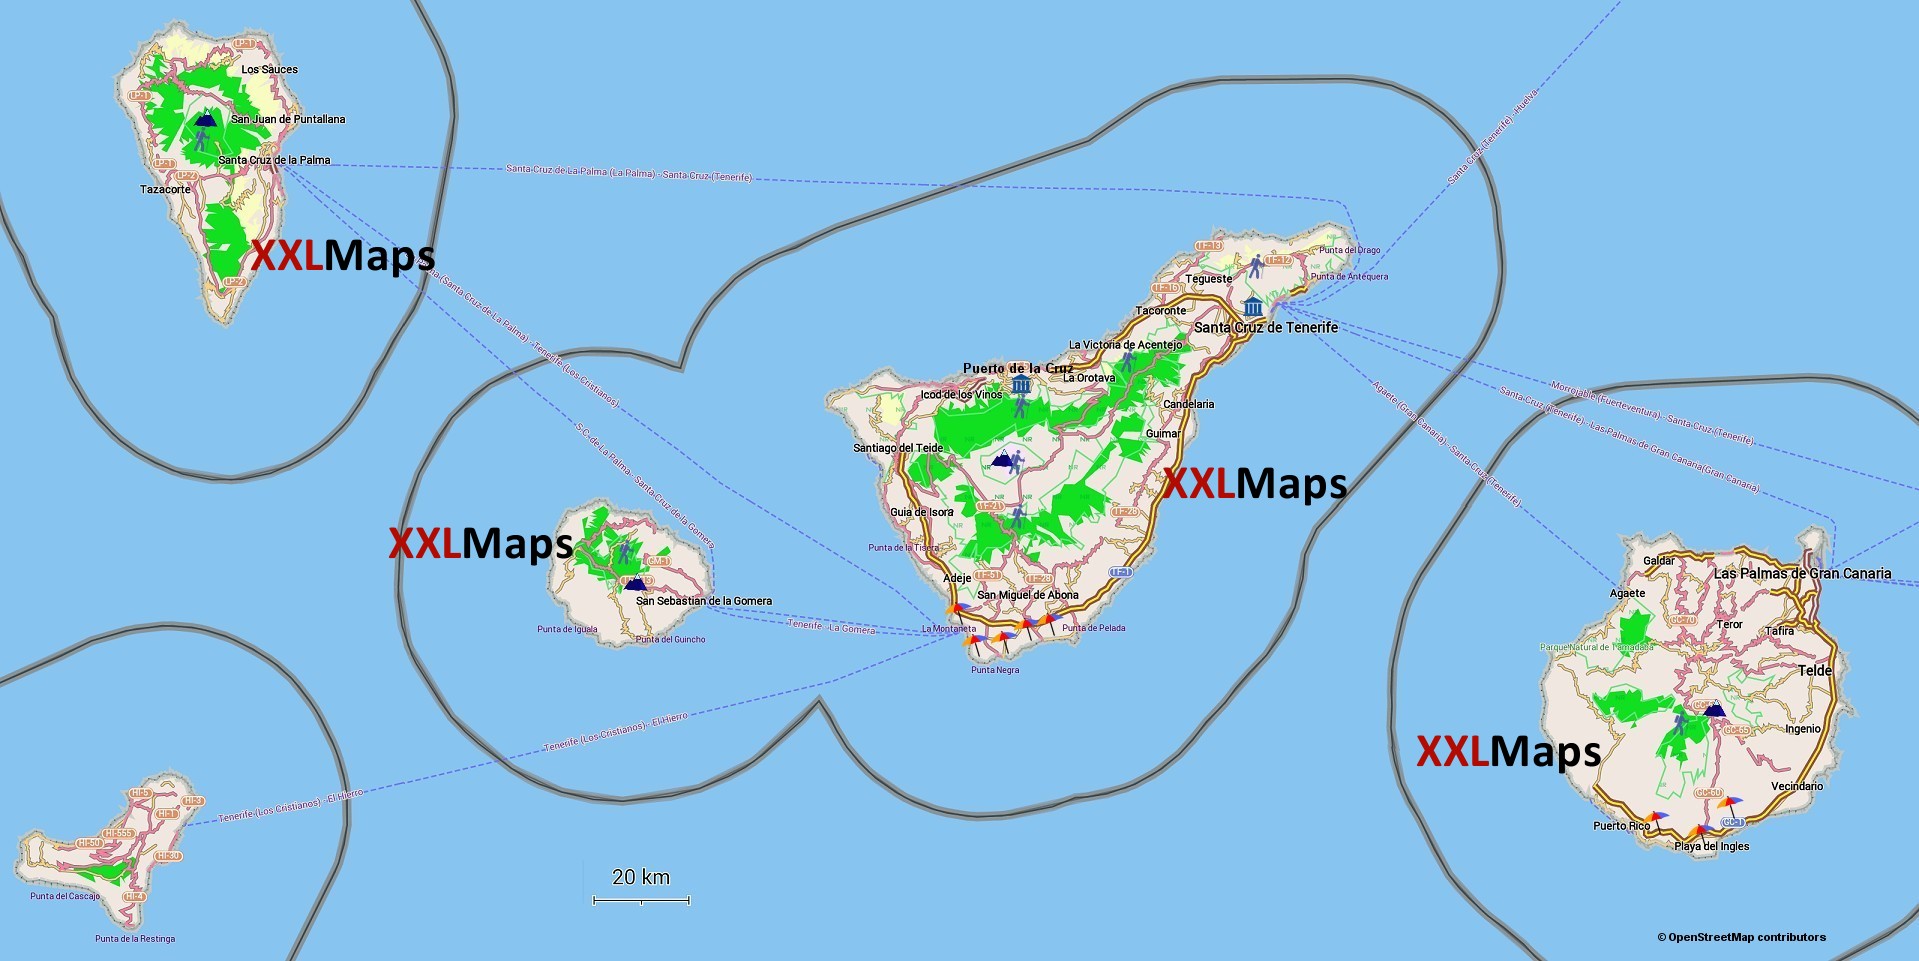 Physical map of Canary islands